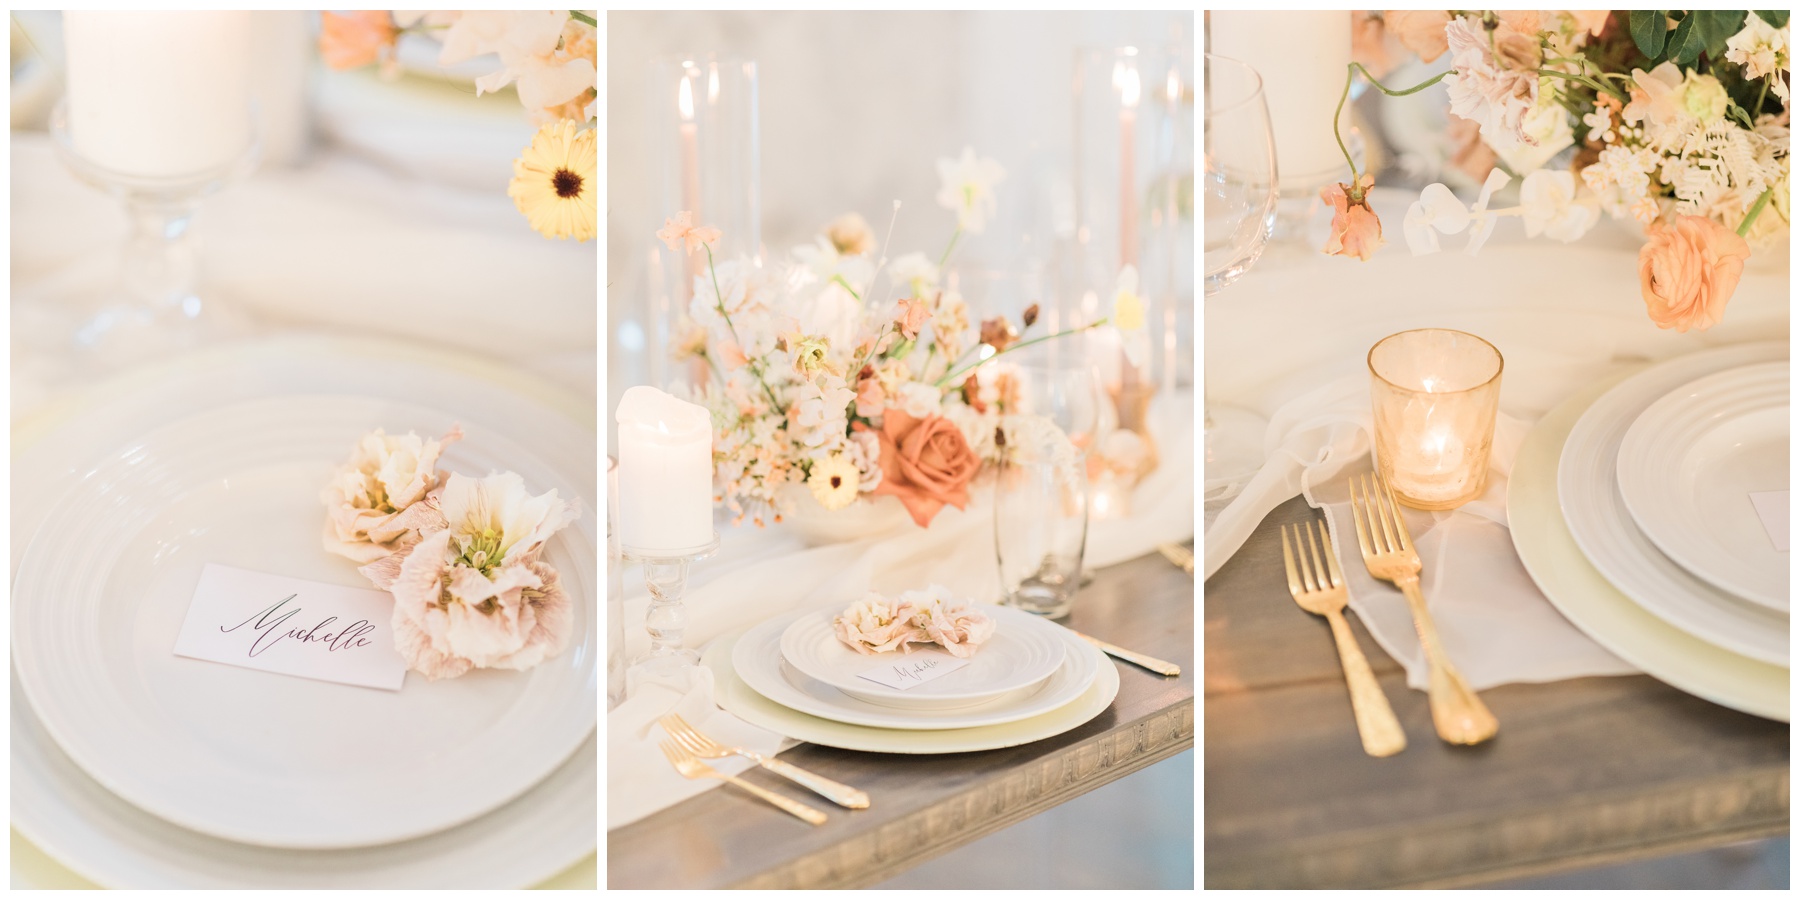 Blush taper candles, peach florals, white linens, and gold cutlery for a spring wedding reception